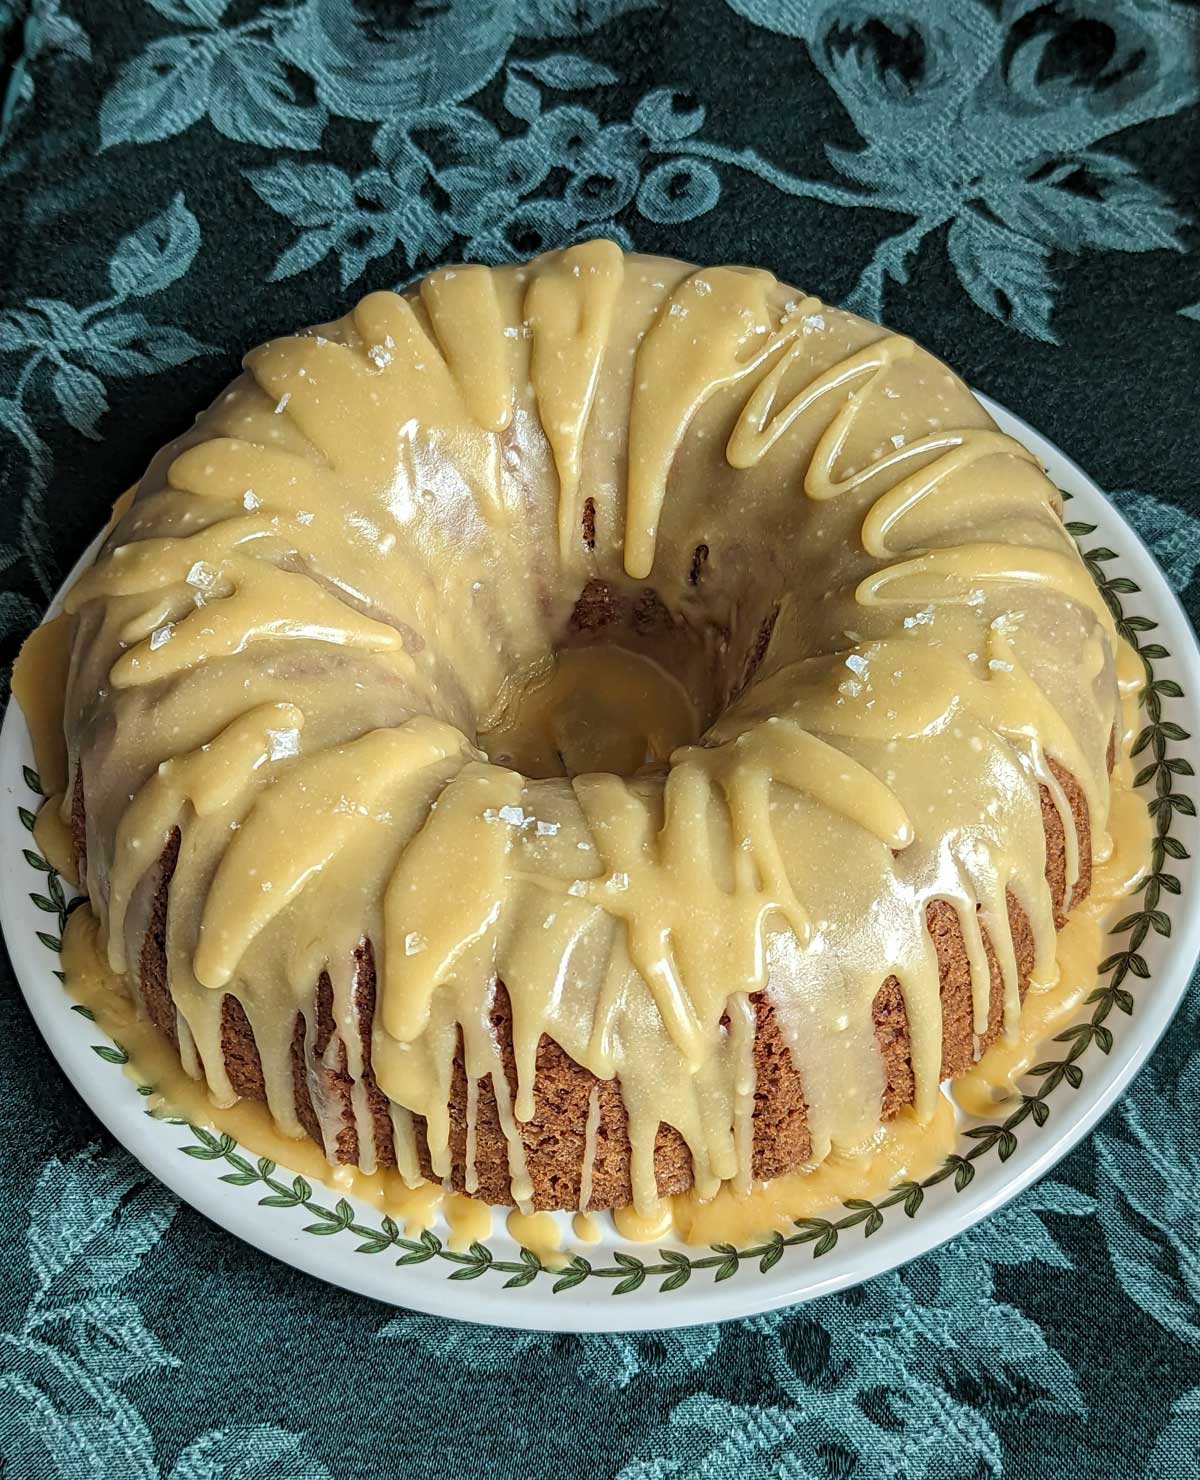 Pear Spiced Bundt Cake with Caramel Icing.